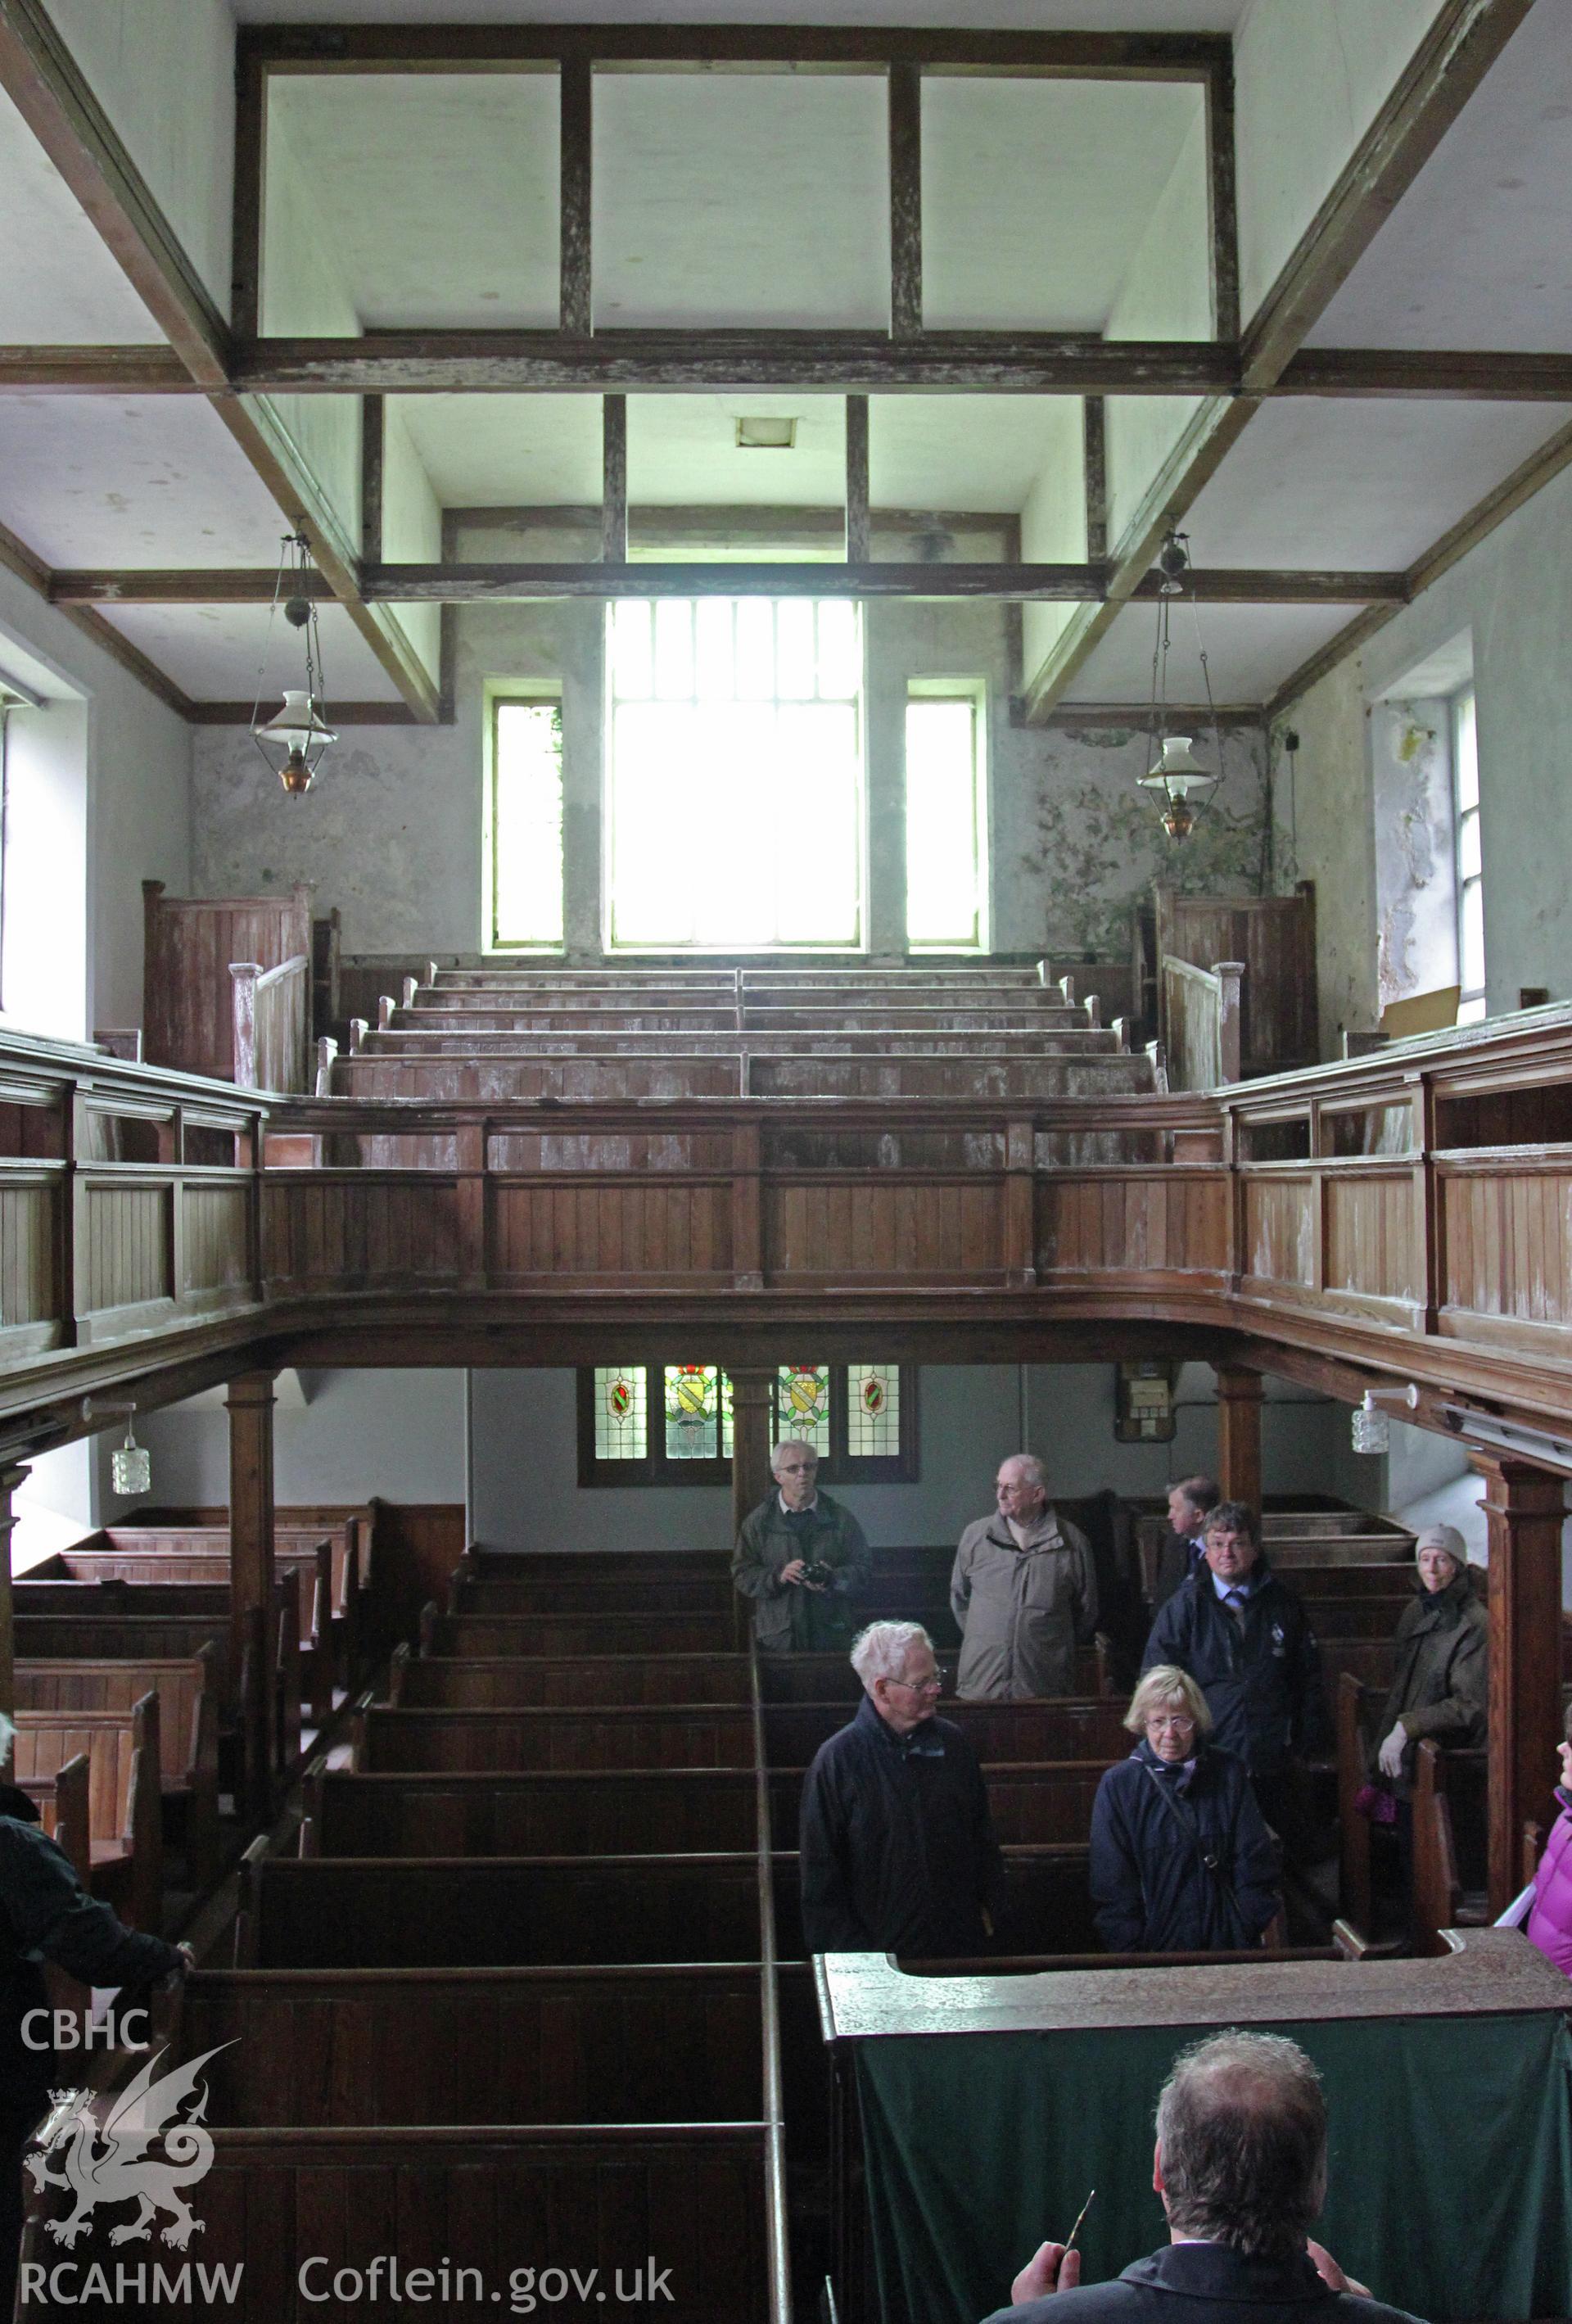 Interior of chapel looking east from pulpit